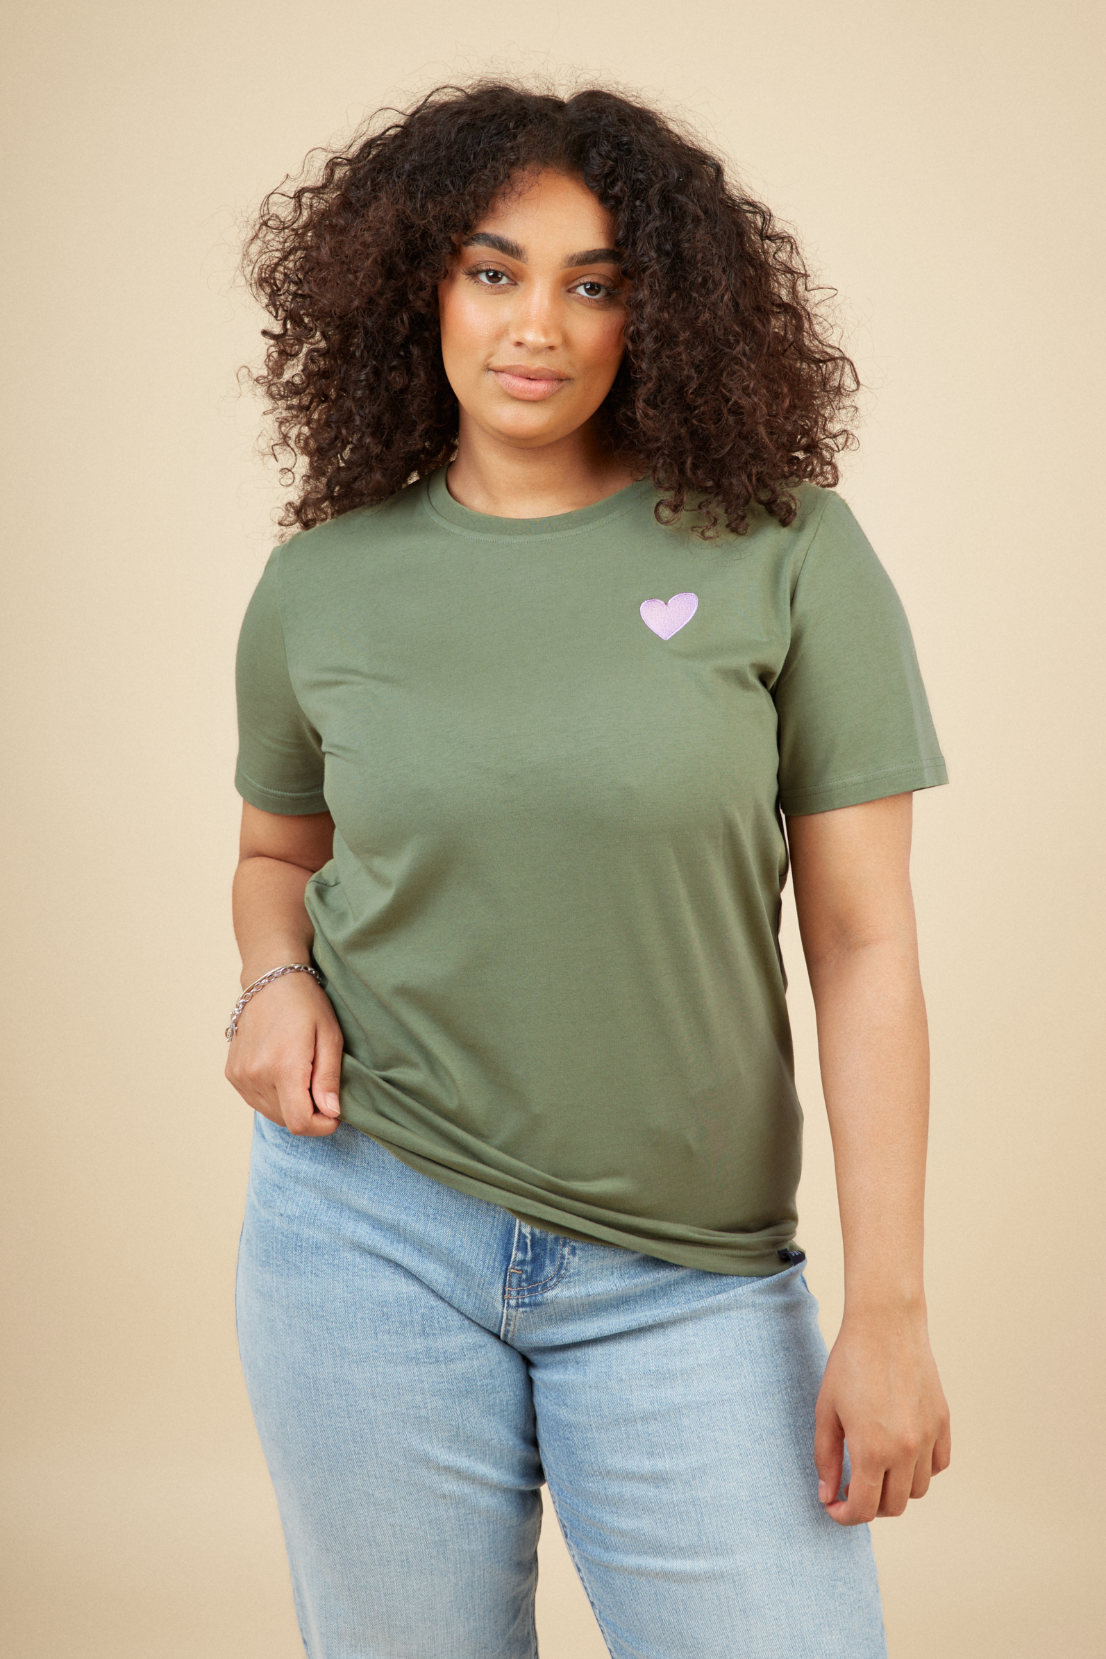 O&F Let Your Heart Guide You Tee